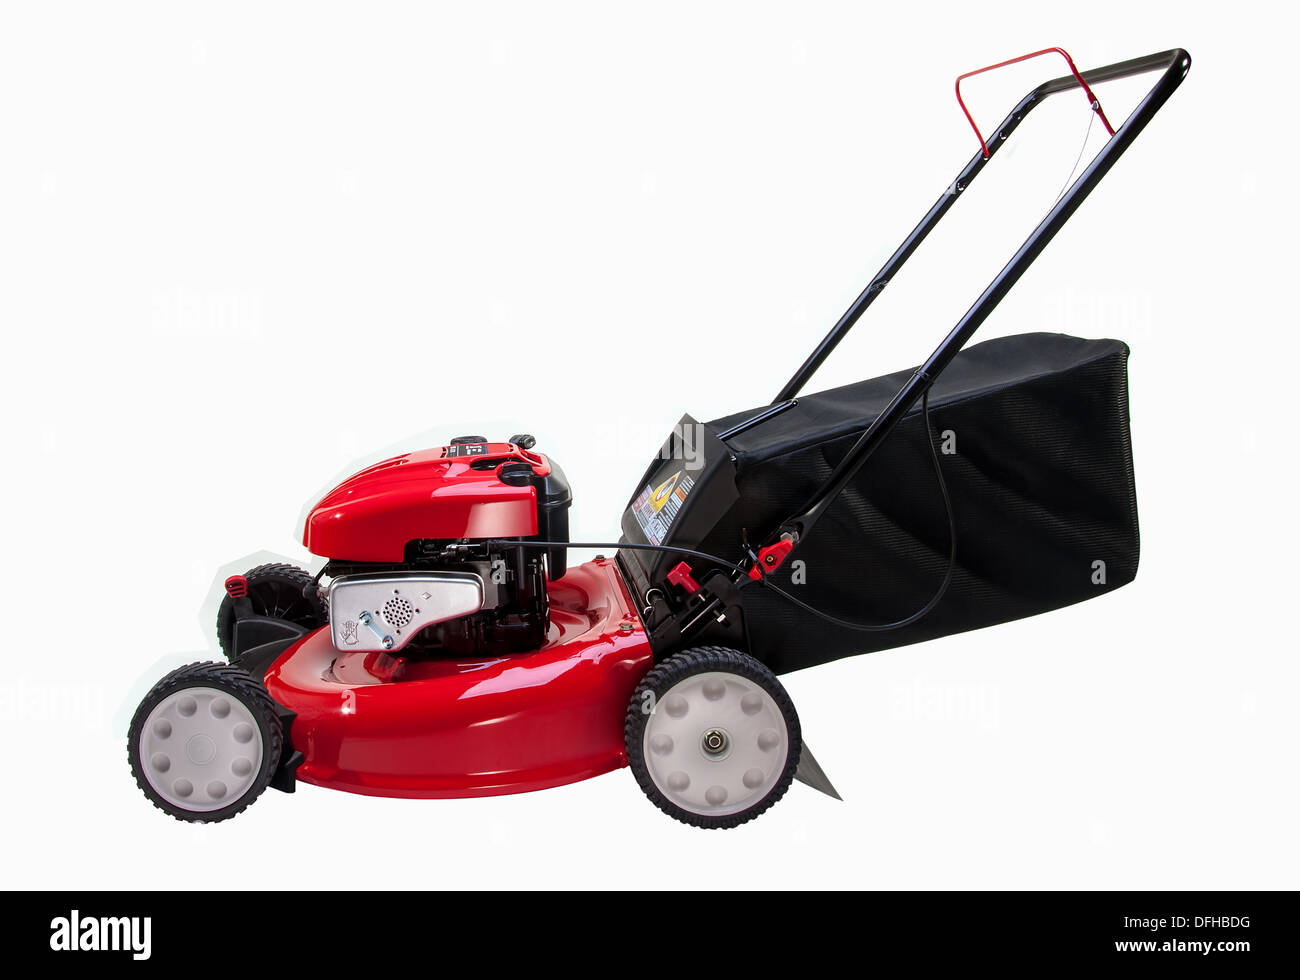 Red Lawn mower on white background Stock Photo